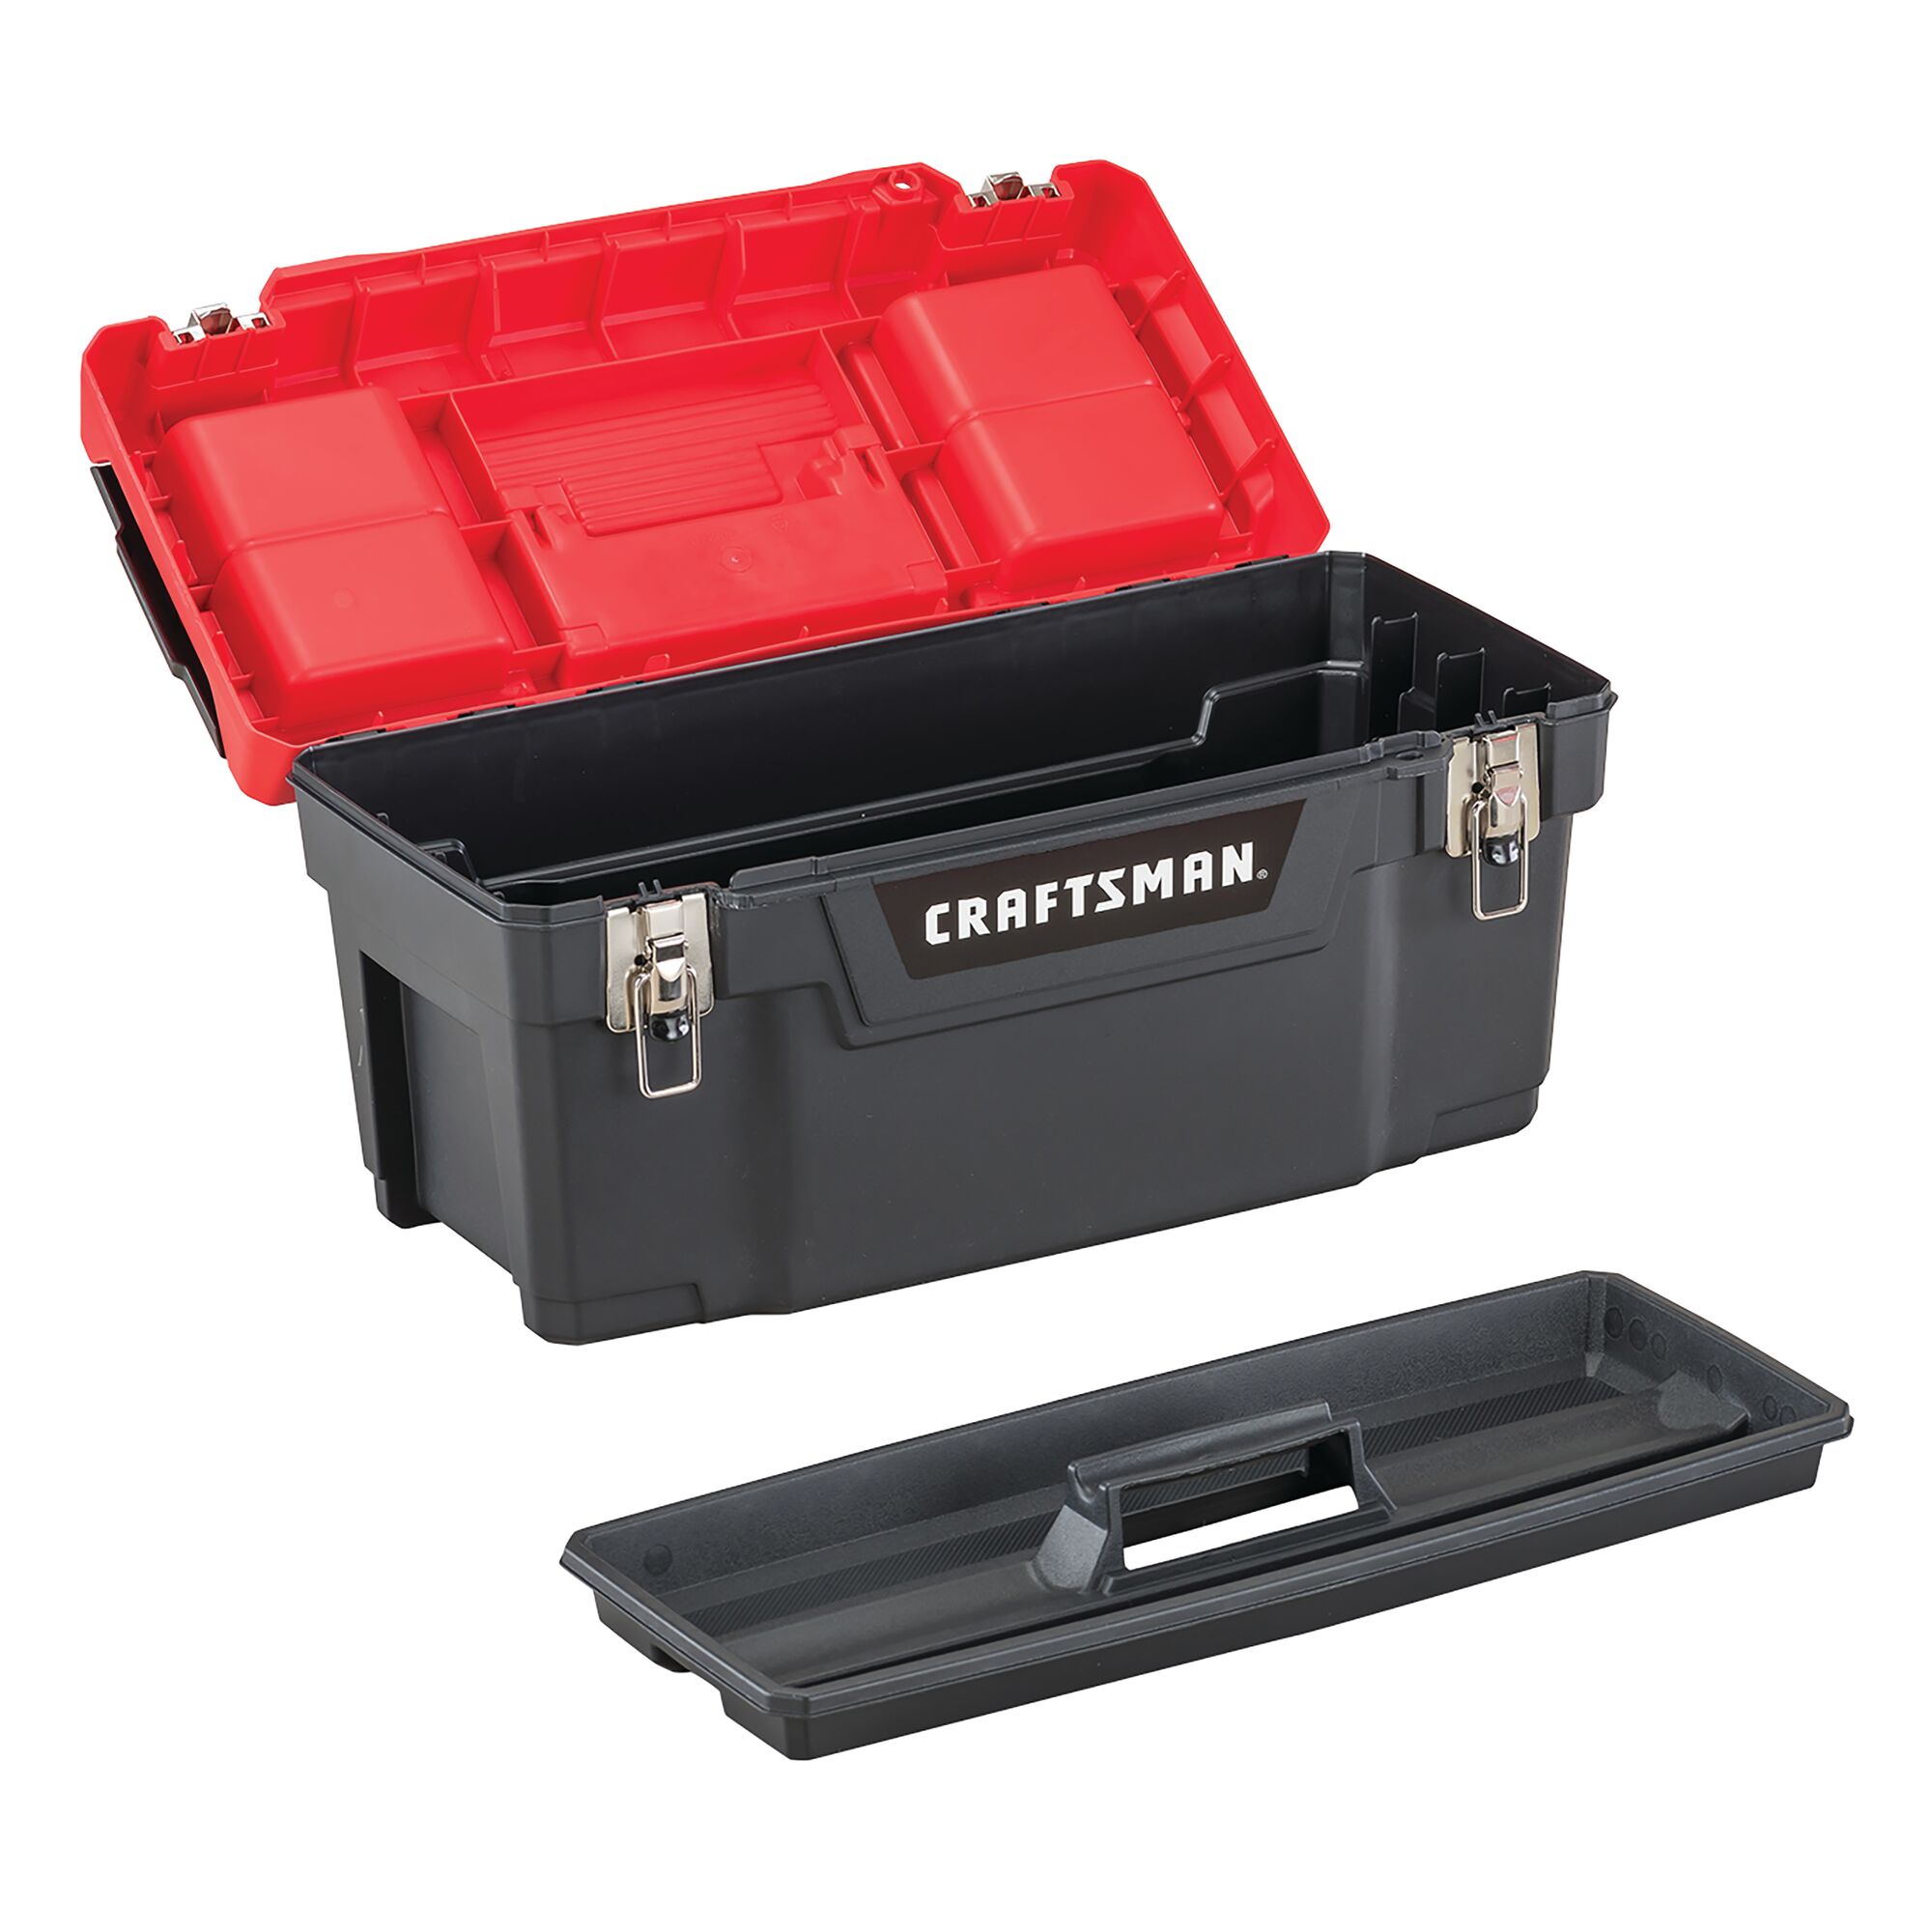 Portable removable tray feature of 25 inch Tool Box.